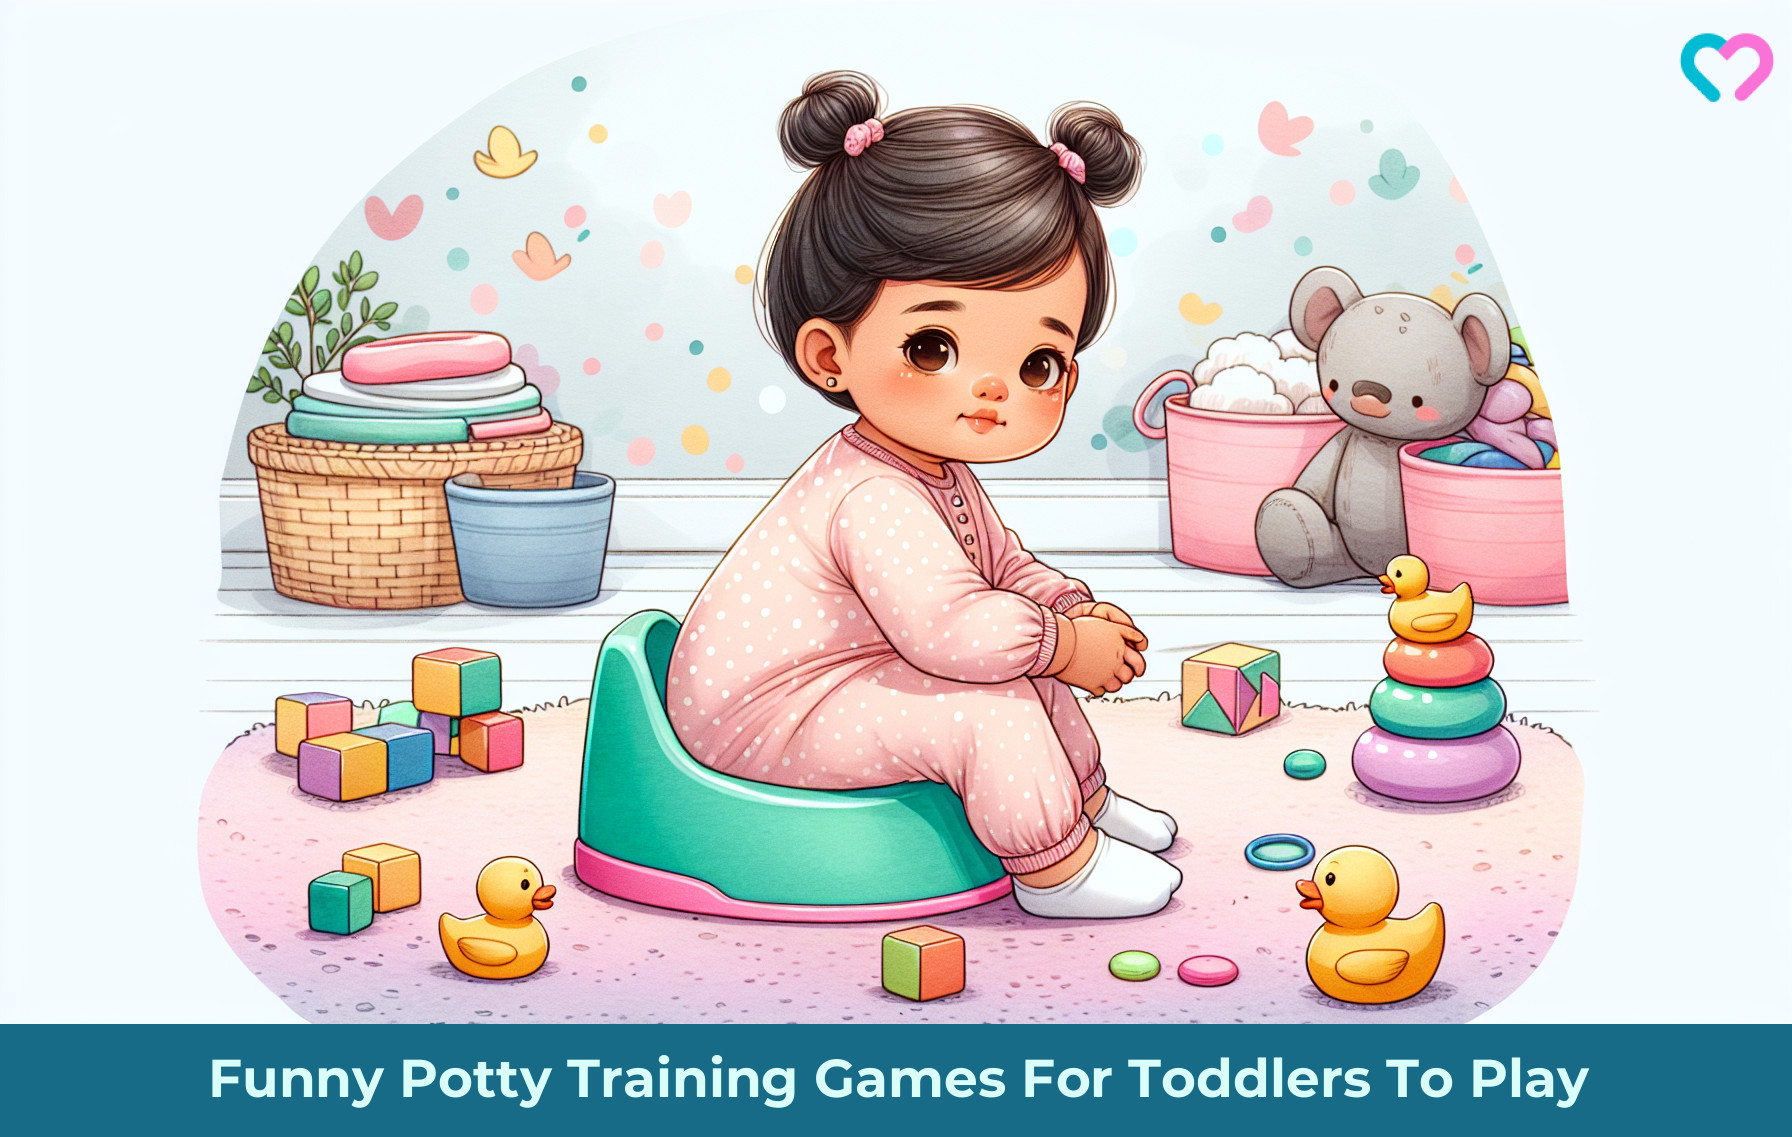 Potty Training Games For Toddlers_illustration